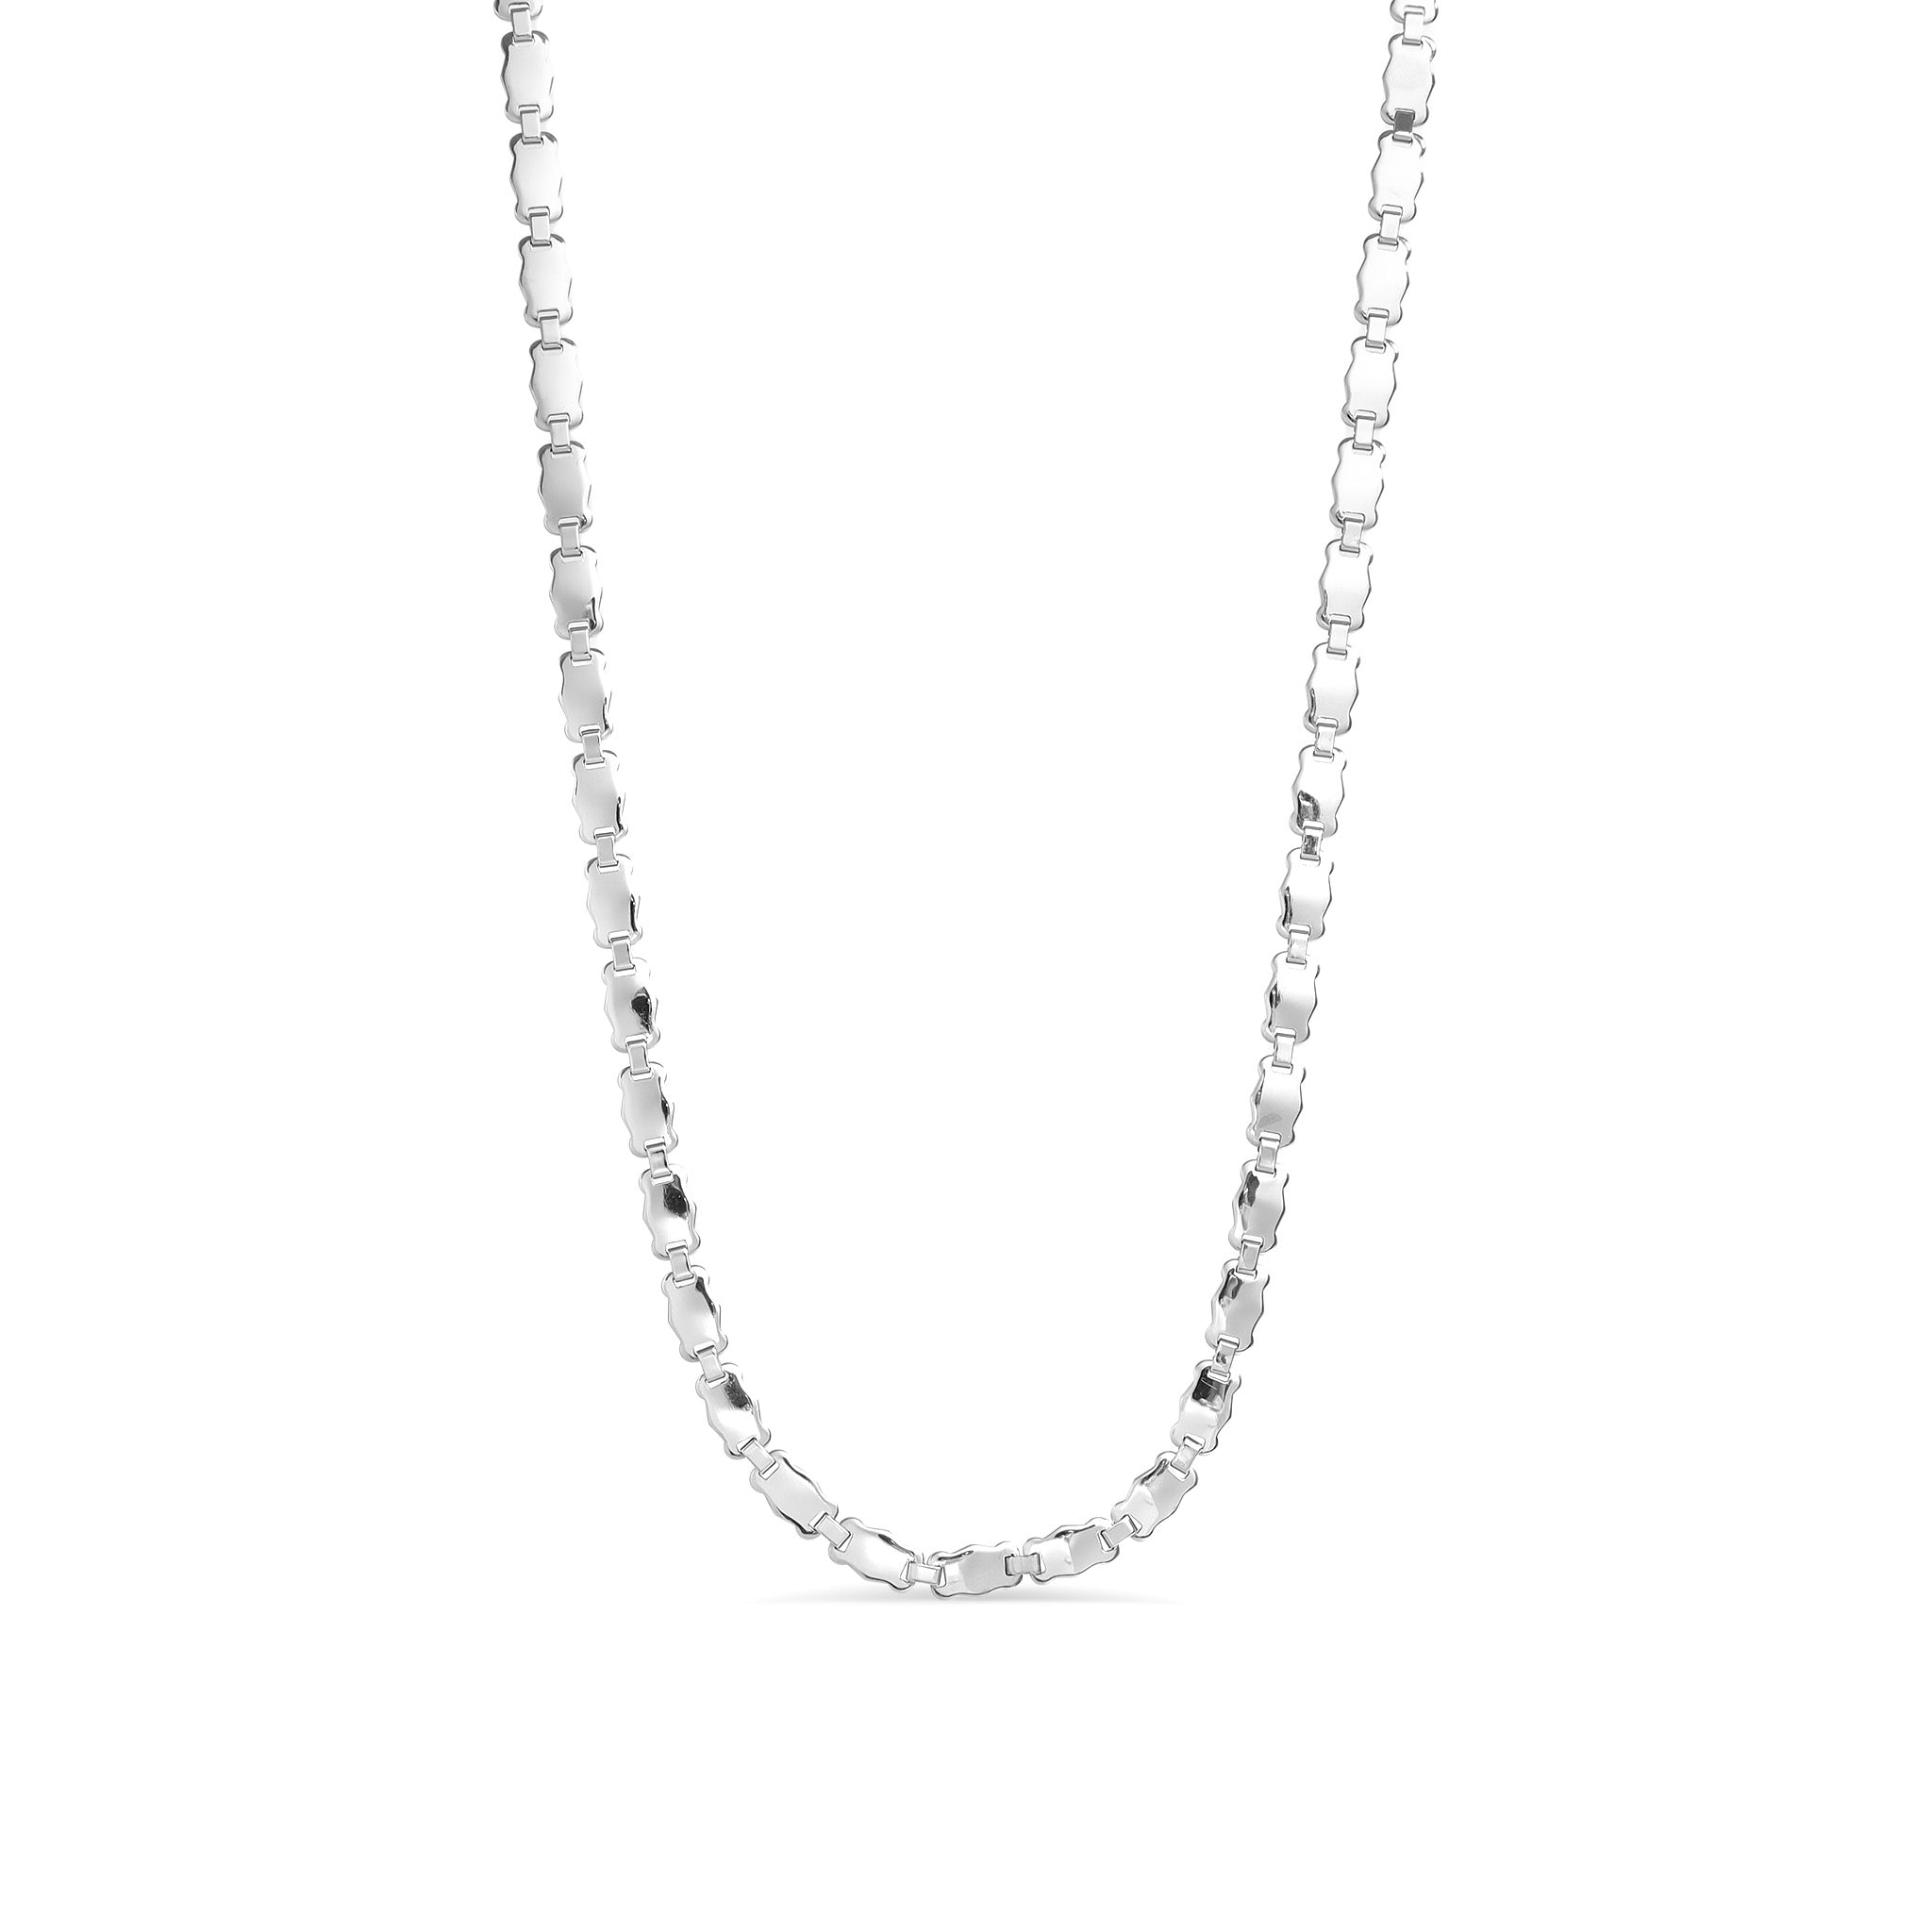 Stainless Steel Necklace / NKJ0014